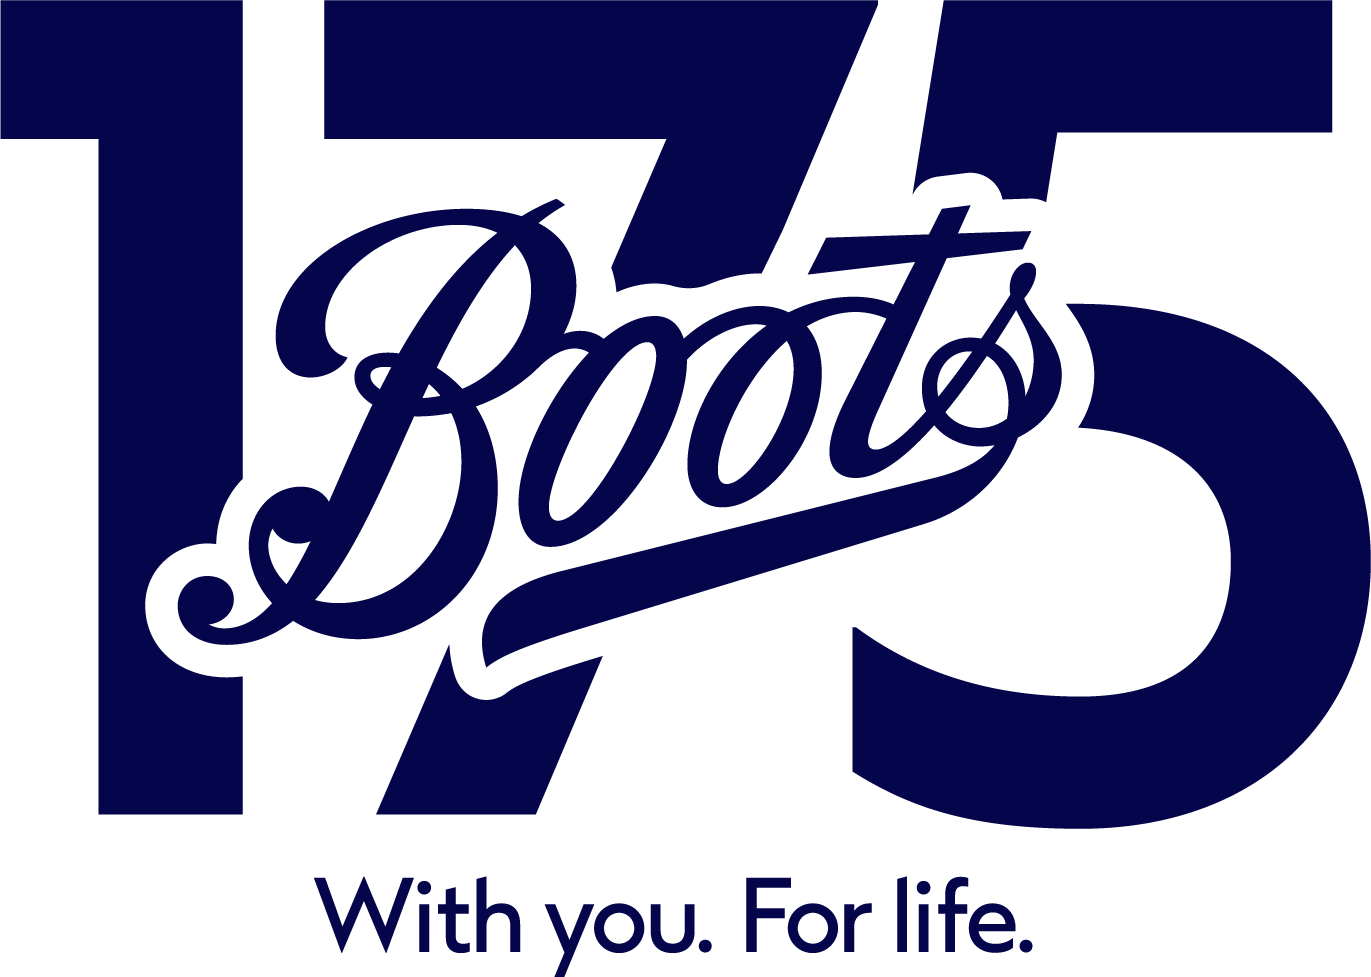 175 years of Boots, with you for life